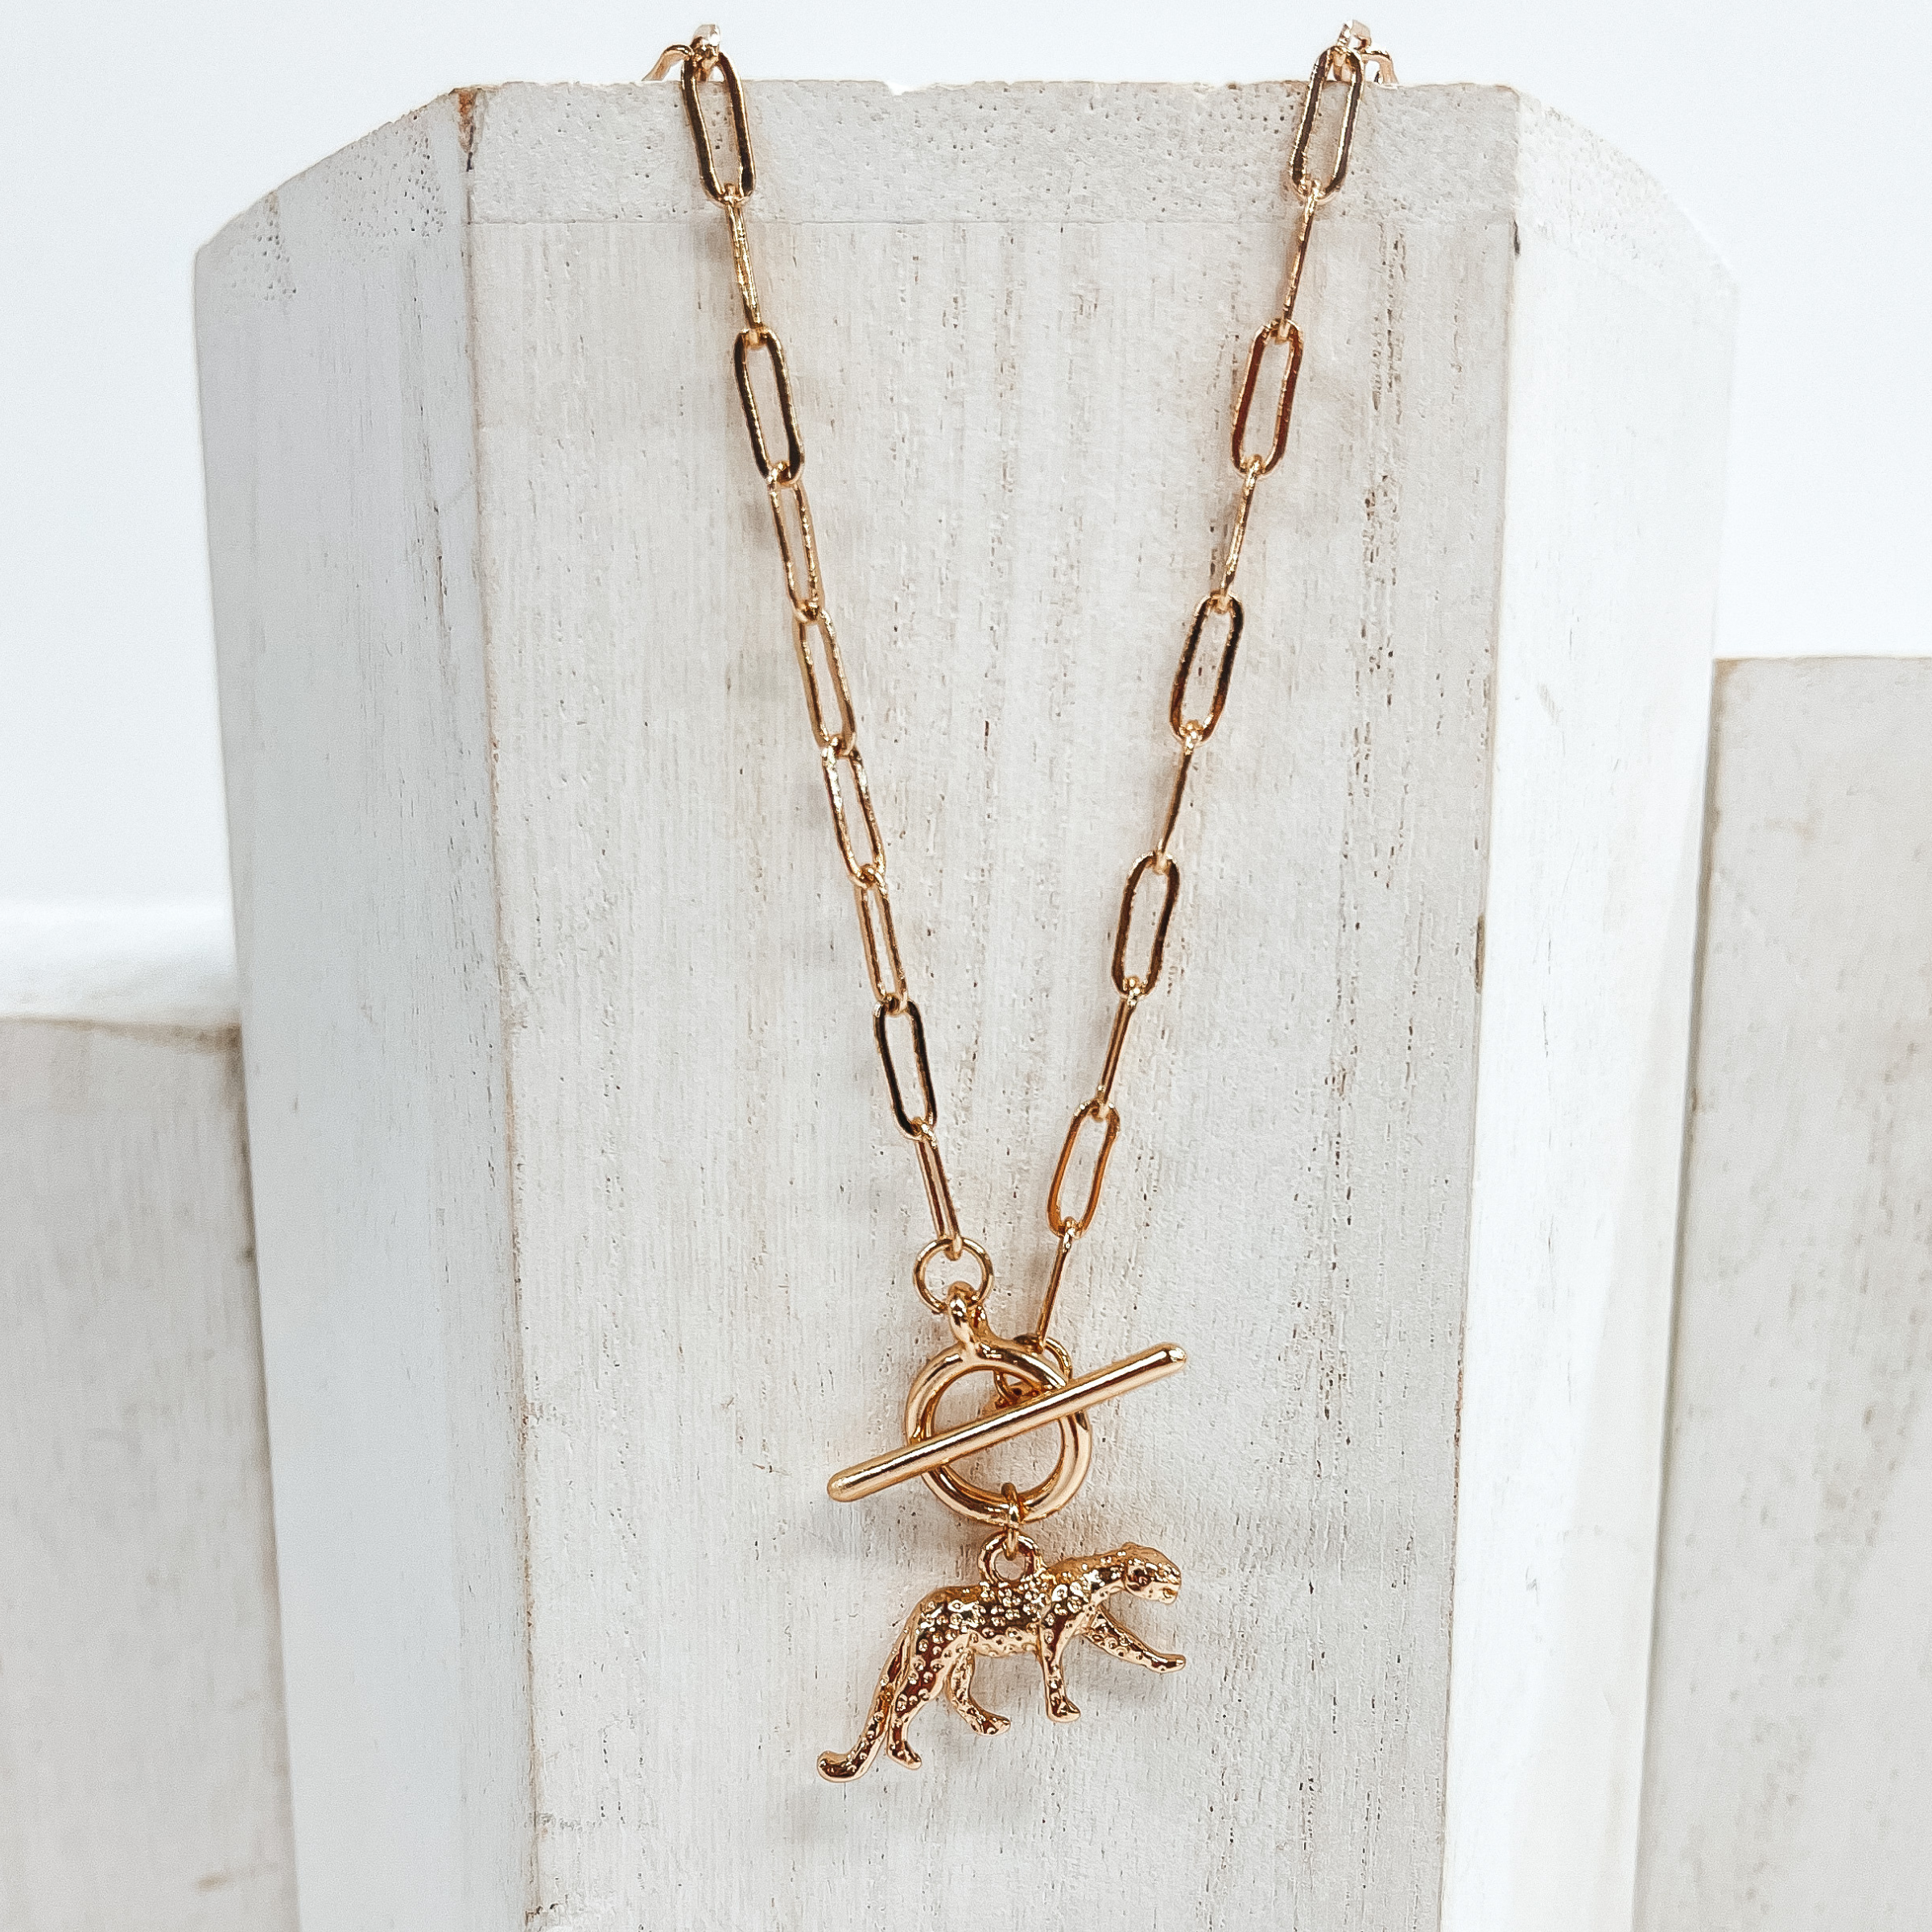 This is a gold chain necklace with a front  toggle clasp and a jaguar pendant.  This necklace is pictured laying on a  white block and on a white background